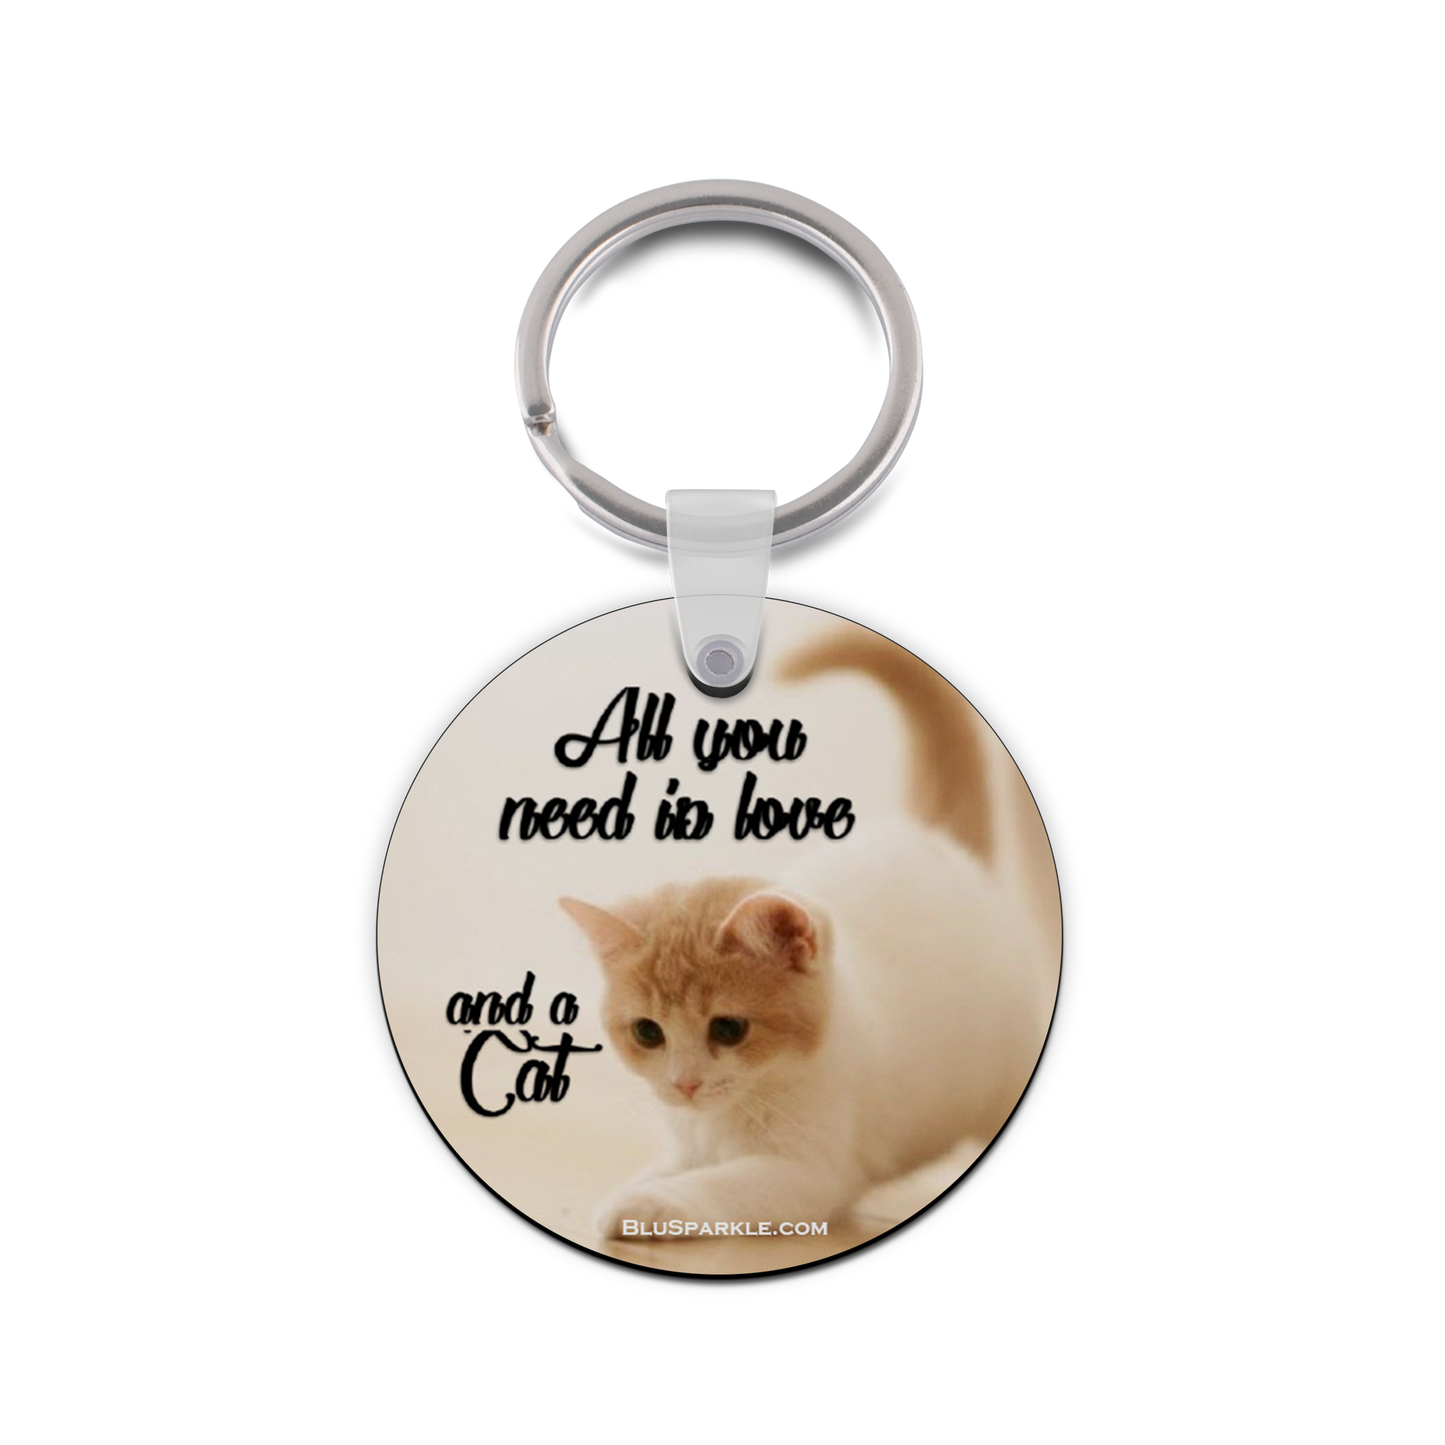 All you need is love and a Cat - Double Sided Key Chain